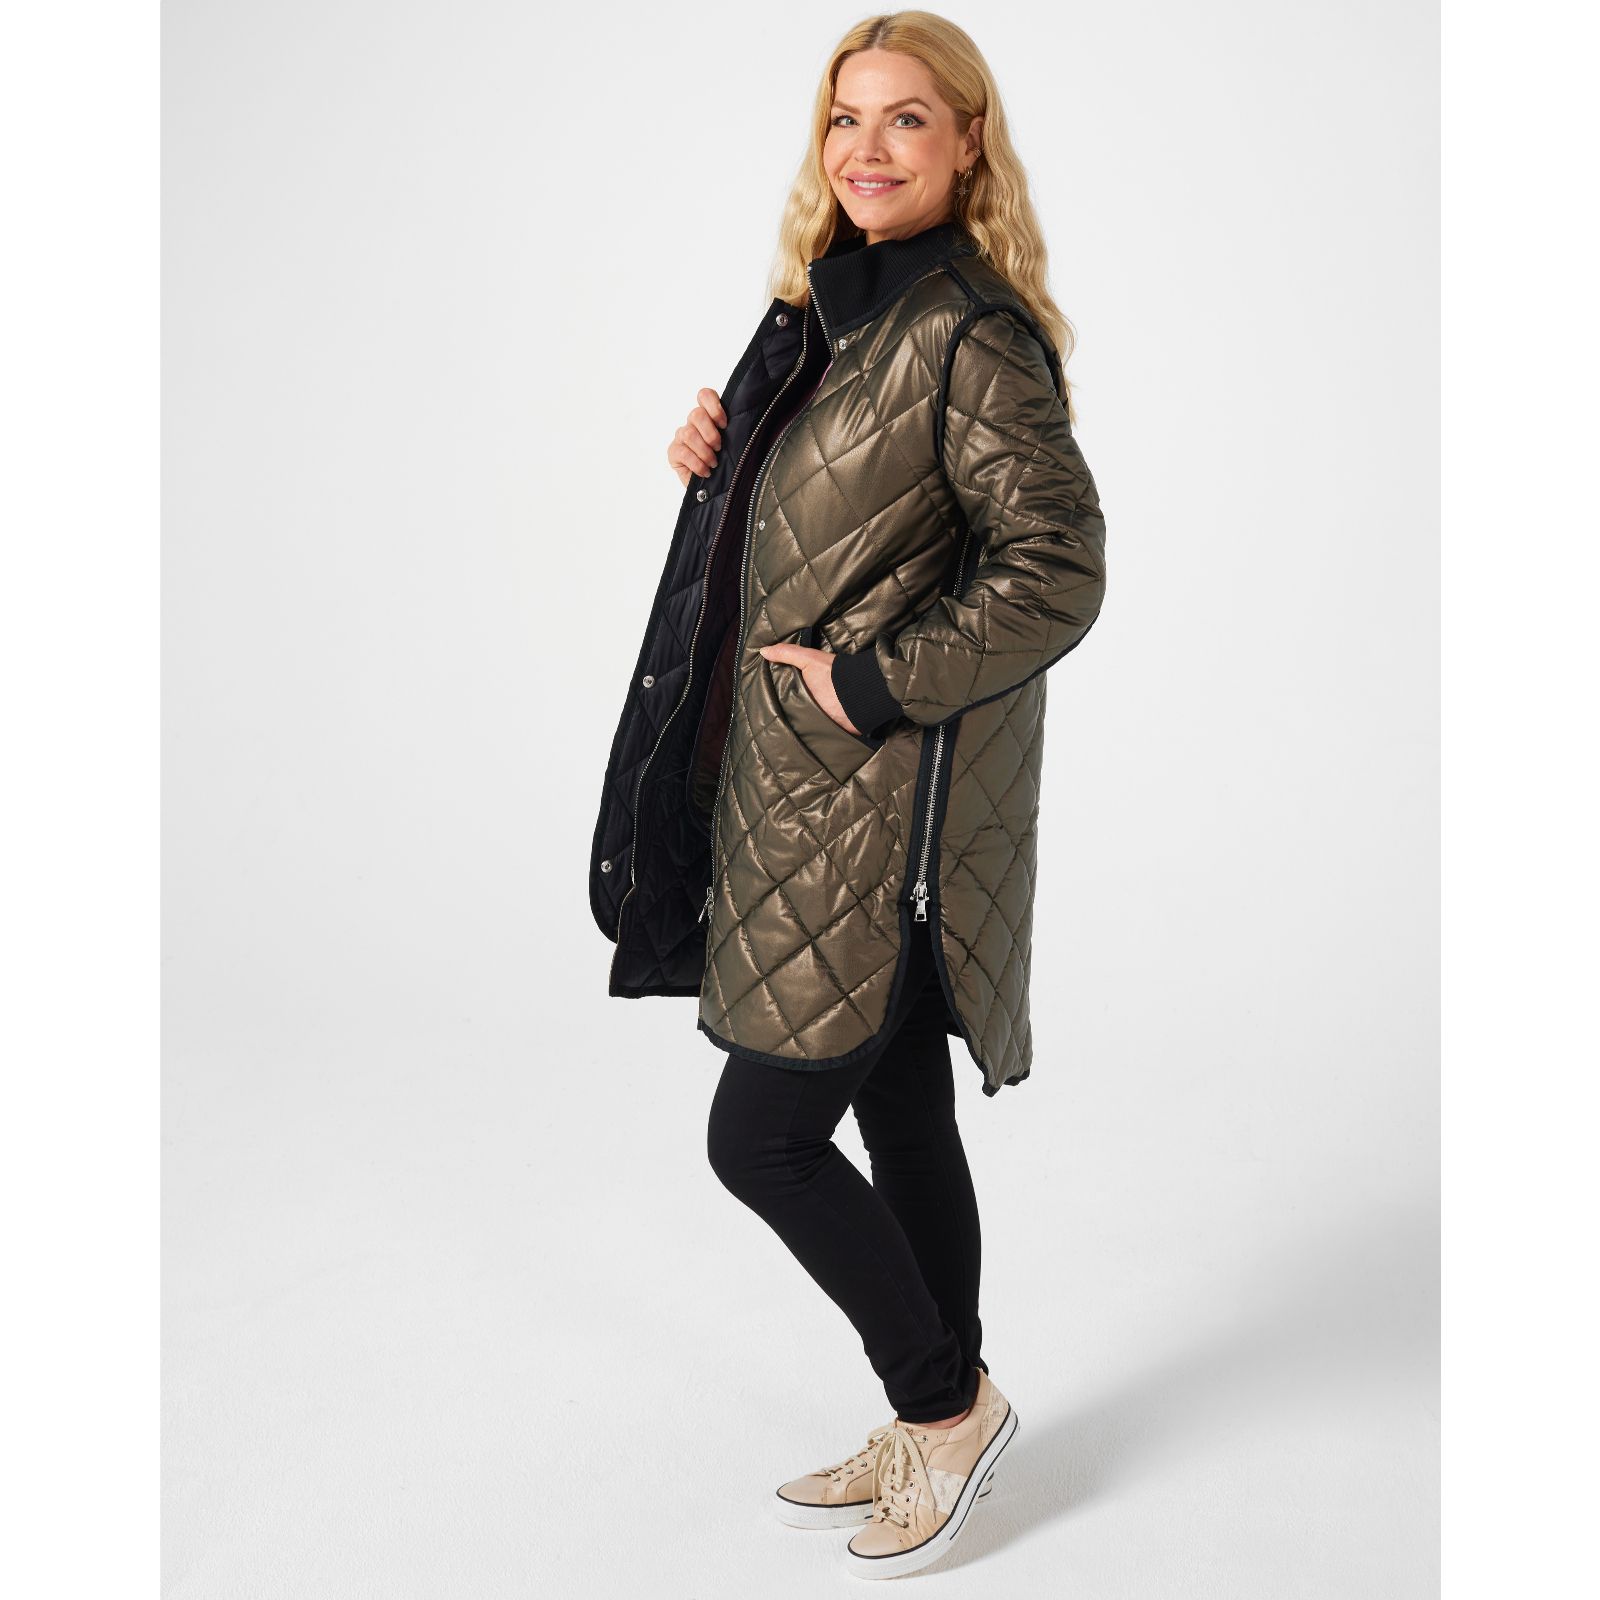 Nuage Faux Leather Diamond Quilted Jacket Knit Collar Zipper Side Vents ...